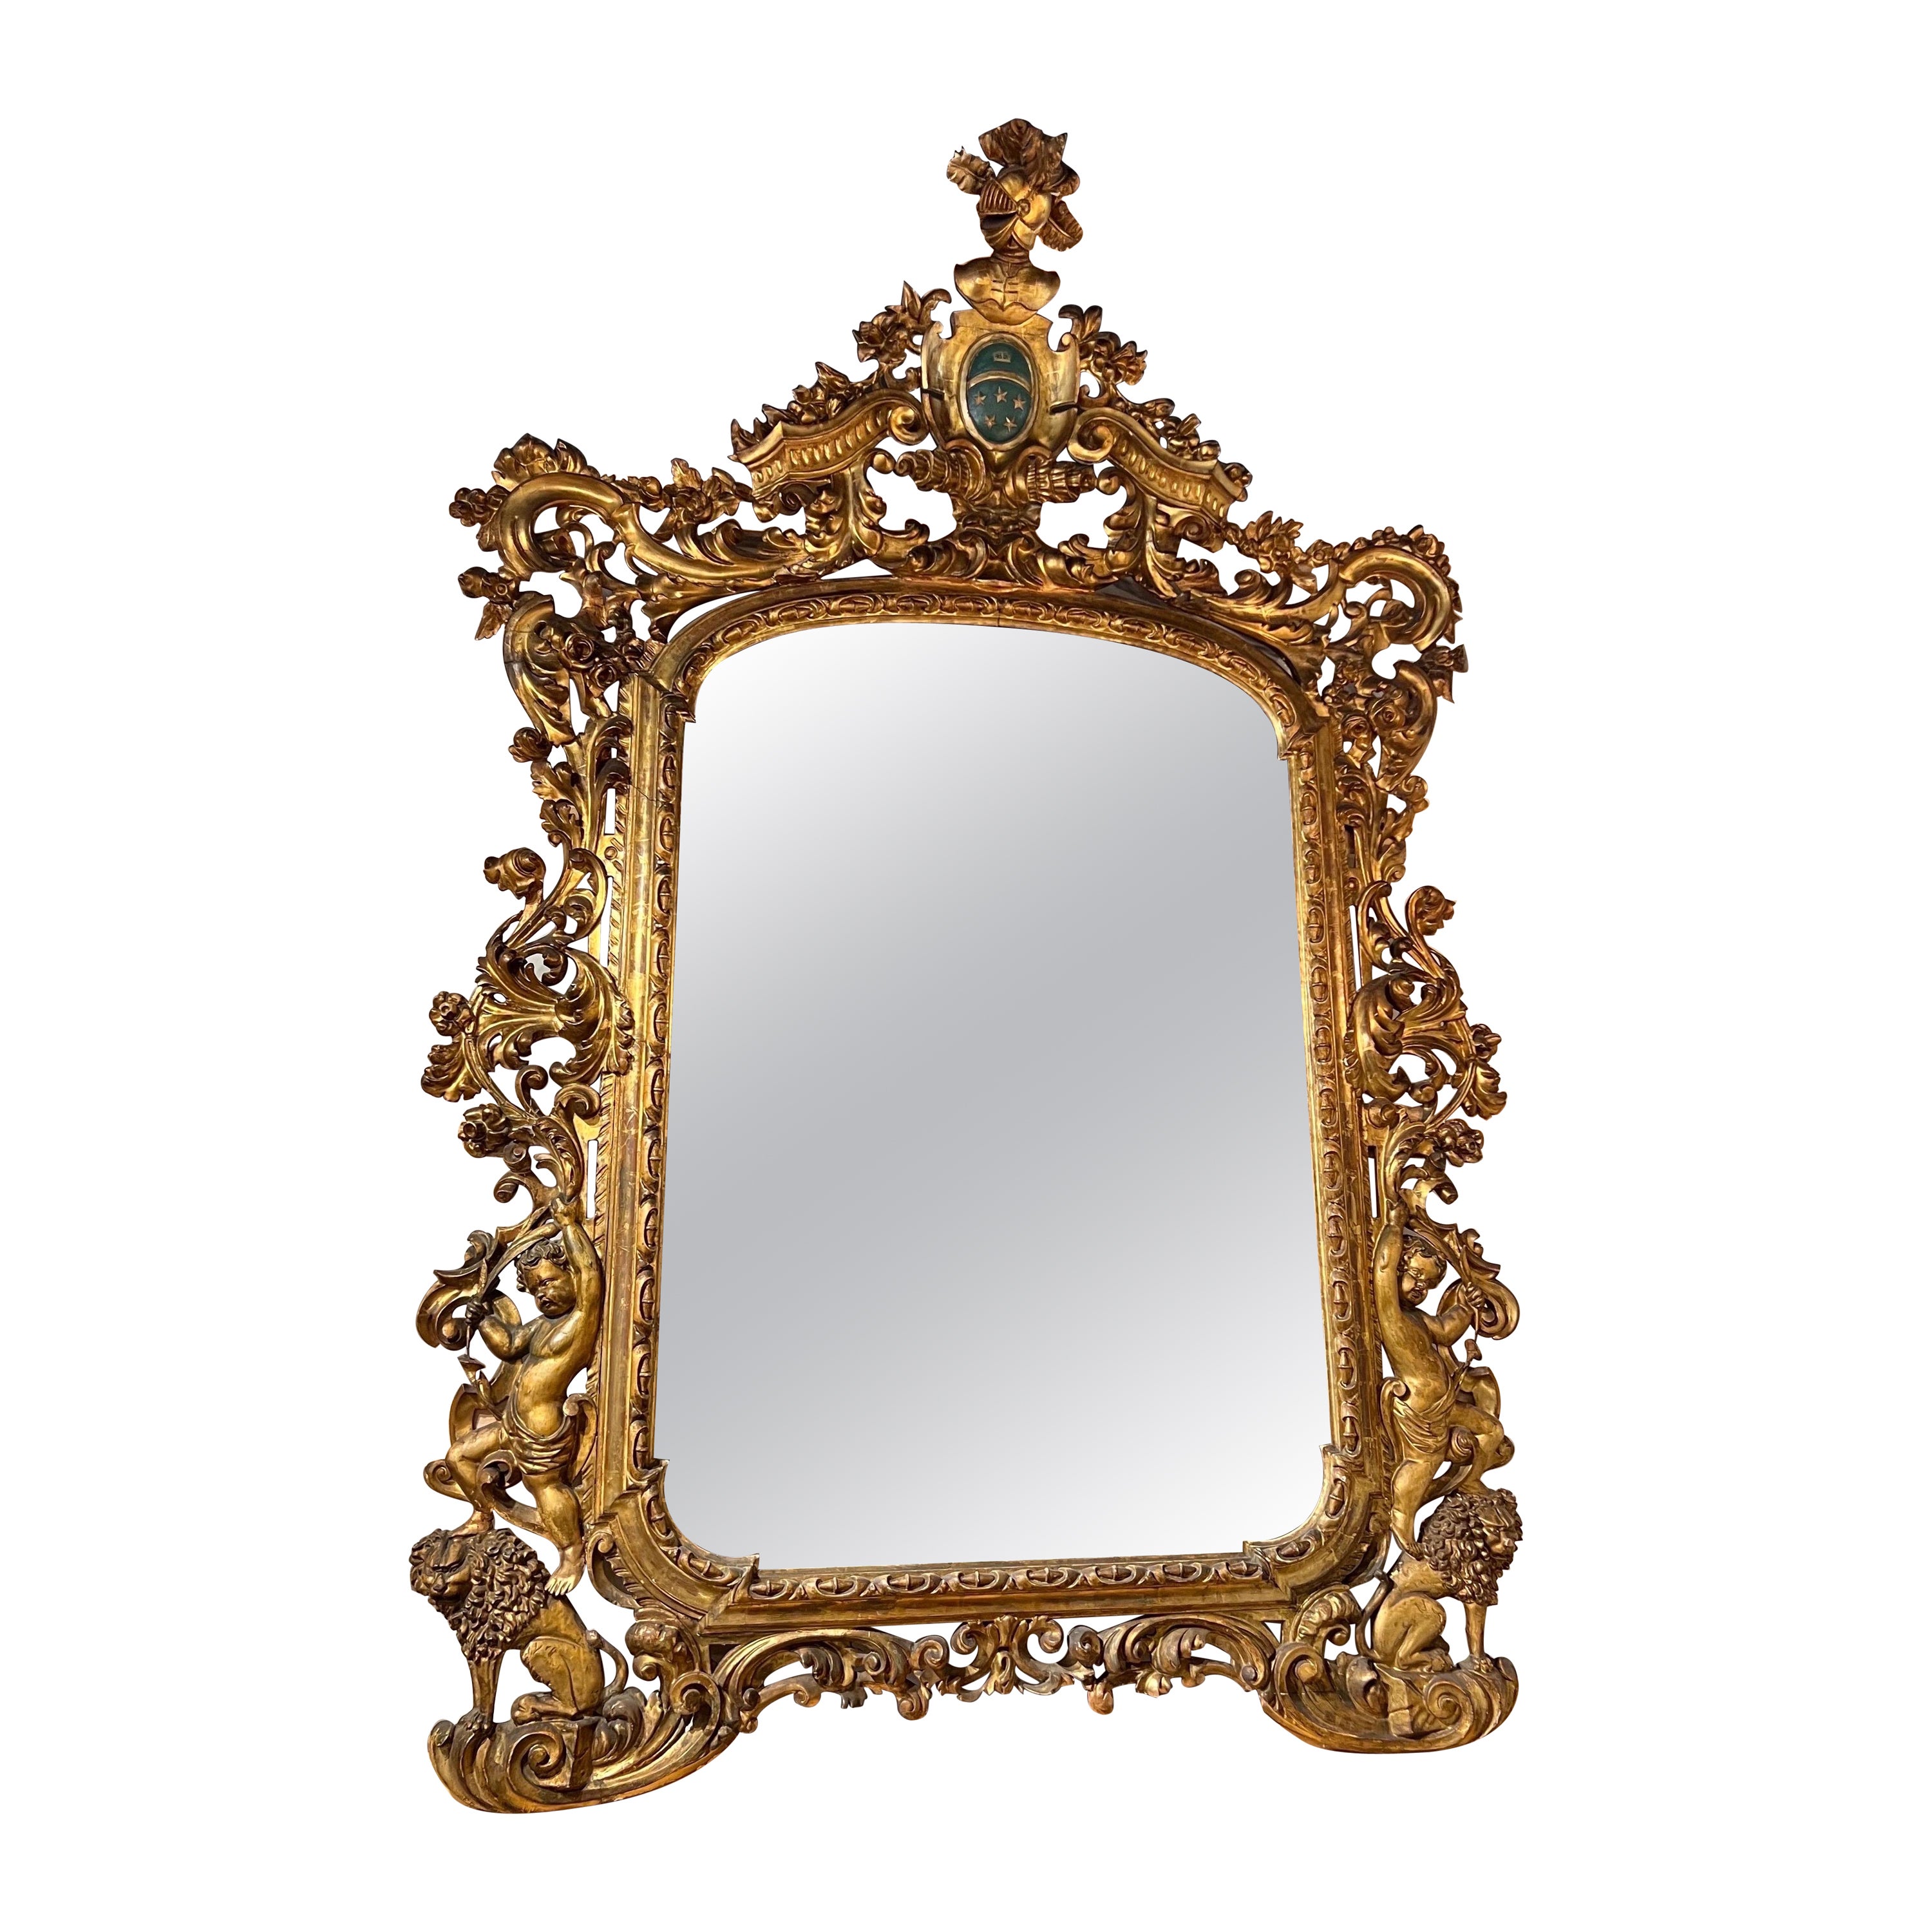 Monumental 18th-19th century Giltwood mirror with coat of arms  For Sale